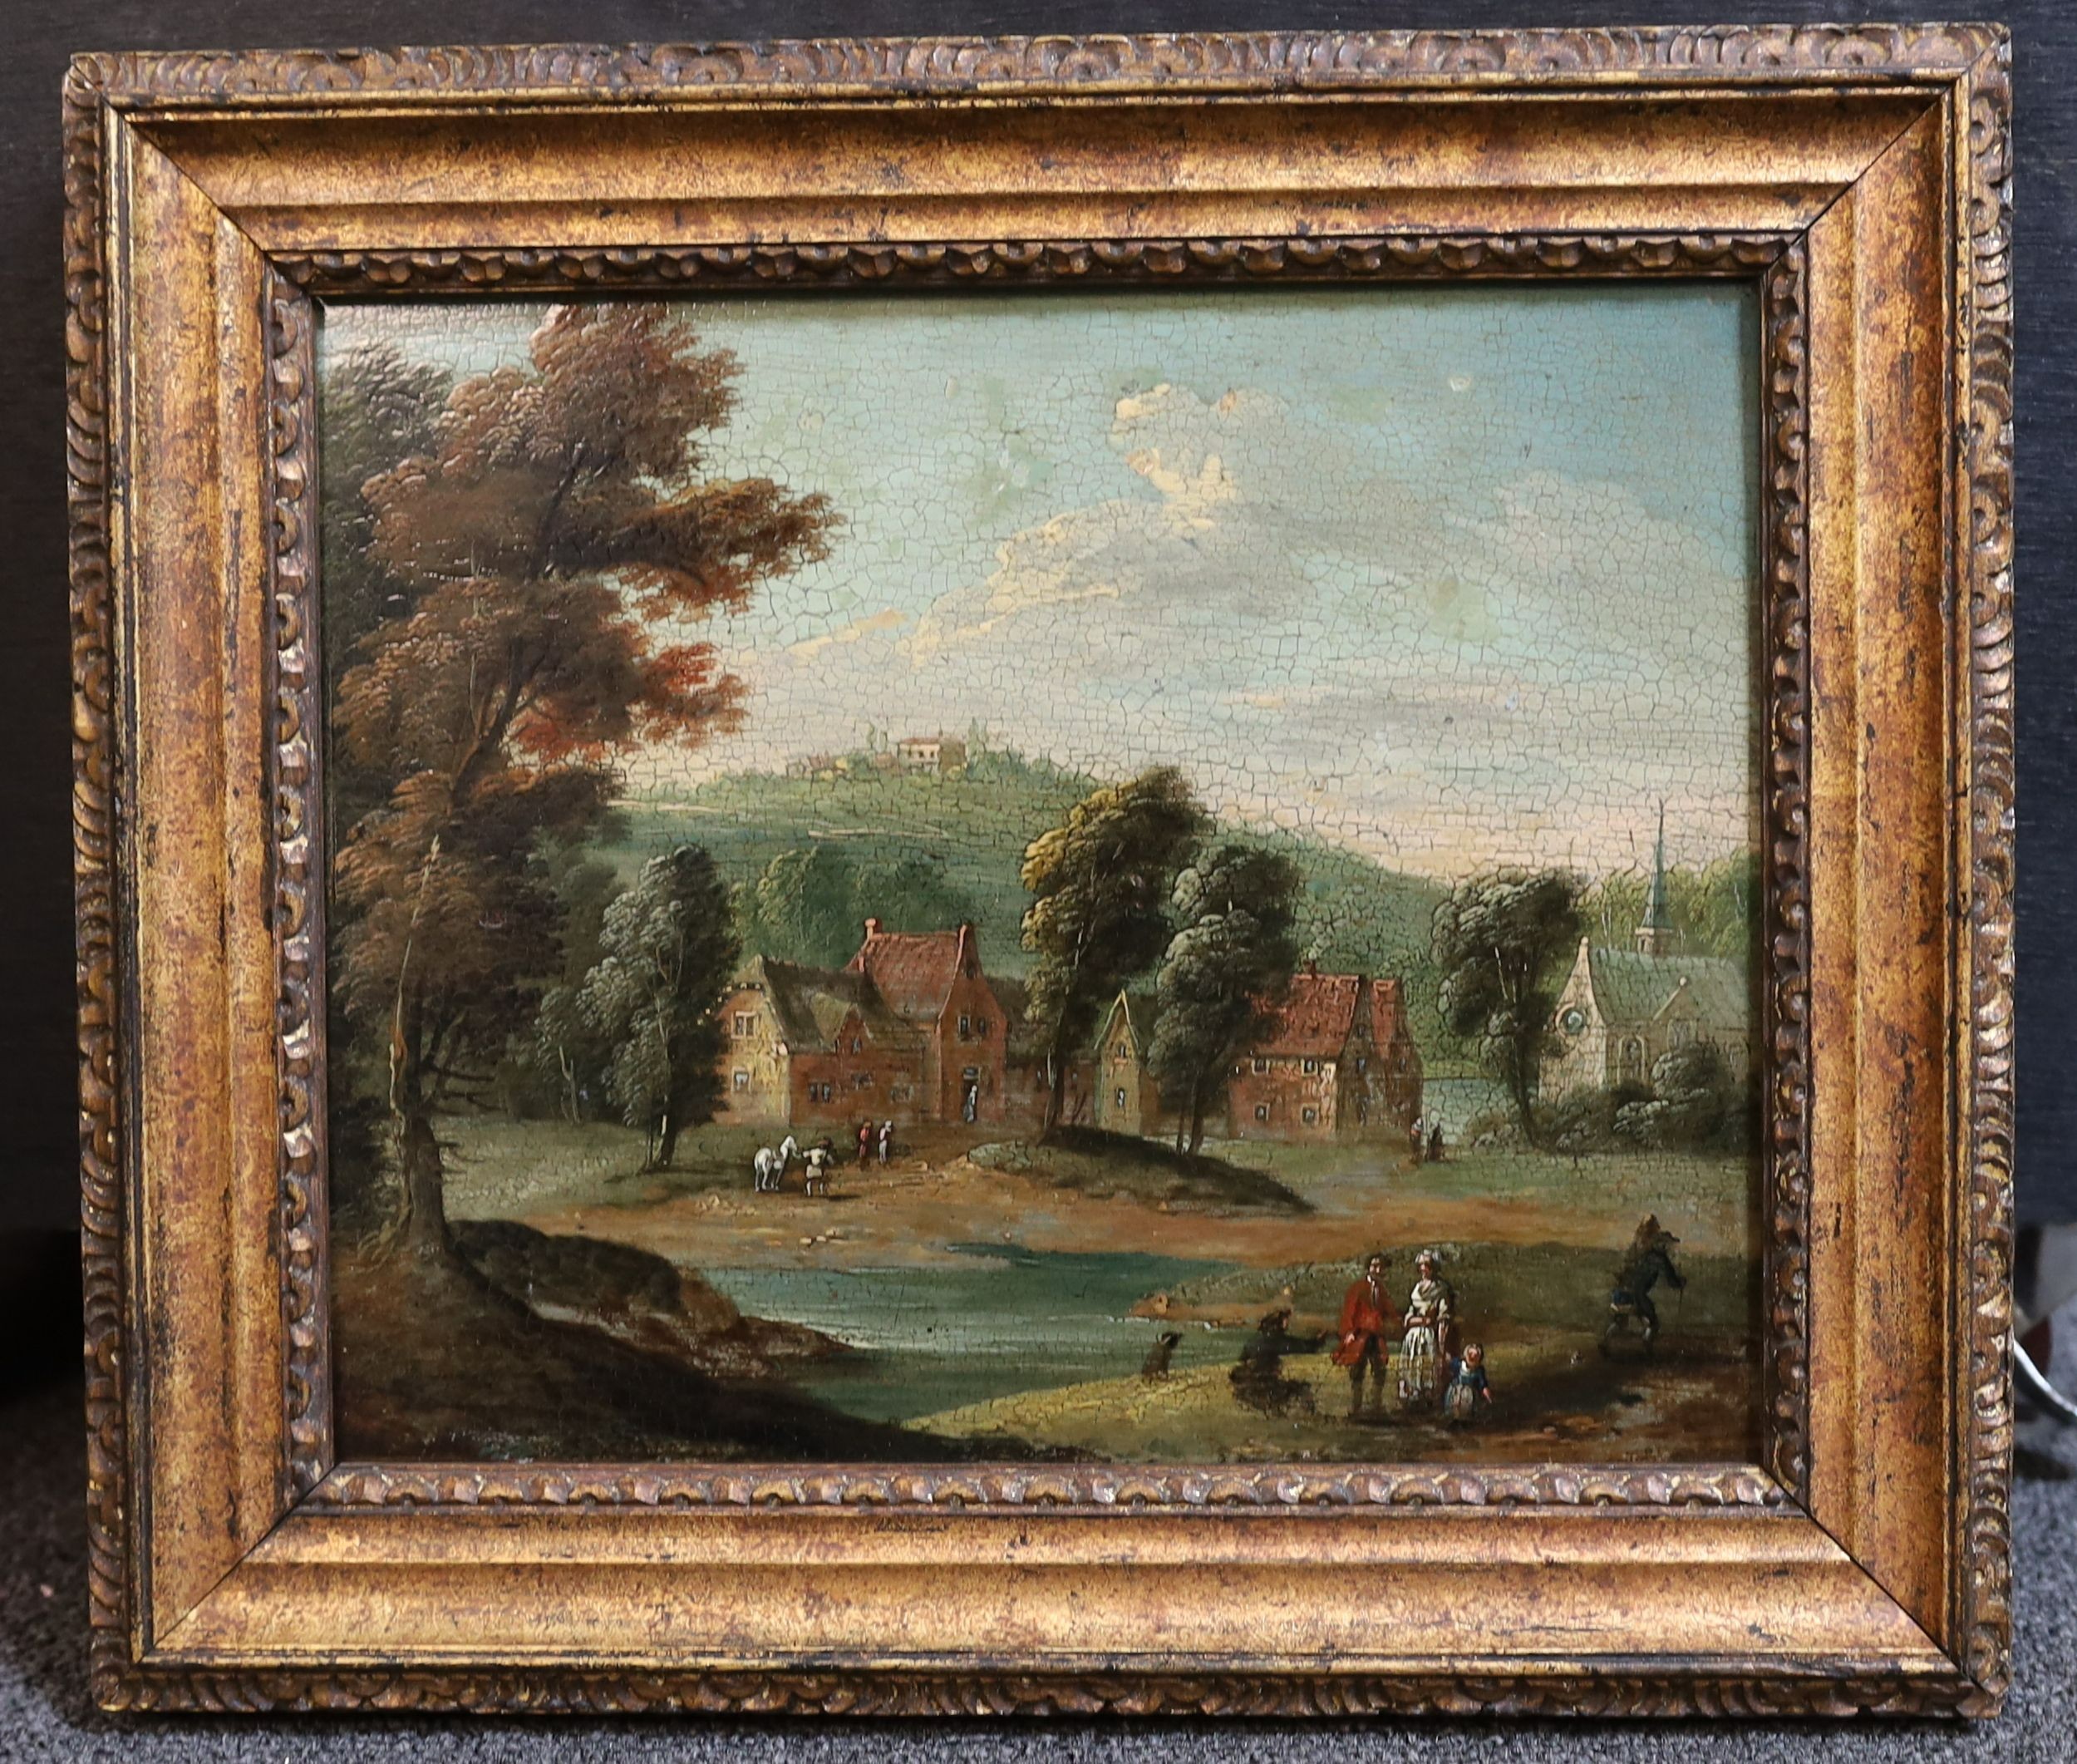 Follower of Jacob Salomonsz van Ruysdael (Dutch, 1629-1682), Figures in a landscape with houses and church beyond, oil on wooden panel, 20 x 24cm